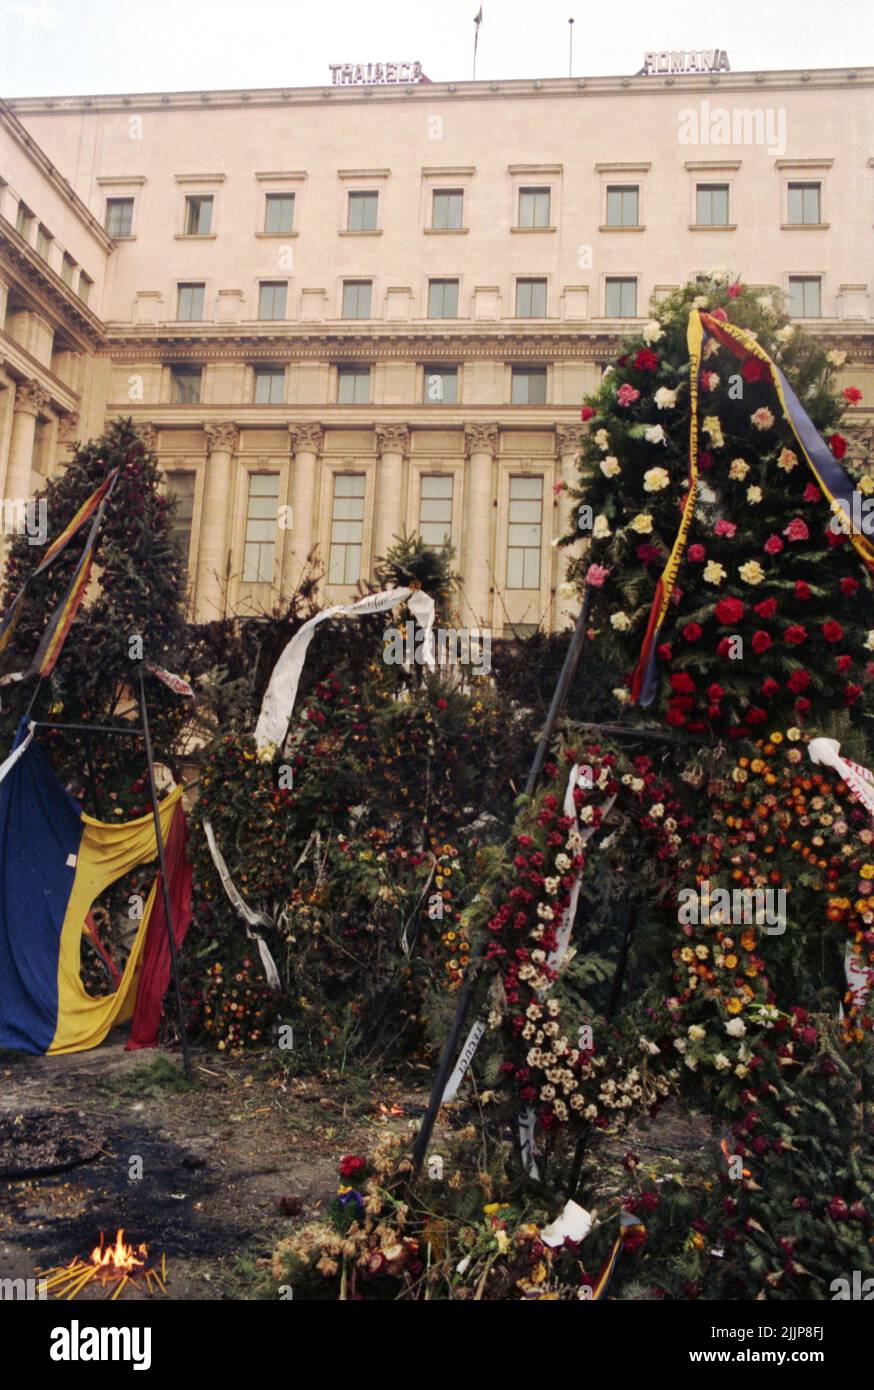 Bucharest, Romania, January 1990. Flowers in Piata Palatului/ Piata Revolutiei for the victims of the anticommunist revolution of December 1989. On top of the governmental building, one can read 'Long live Romania', after the removal of the in- between words 'the Socialist republic of '. Stock Photo